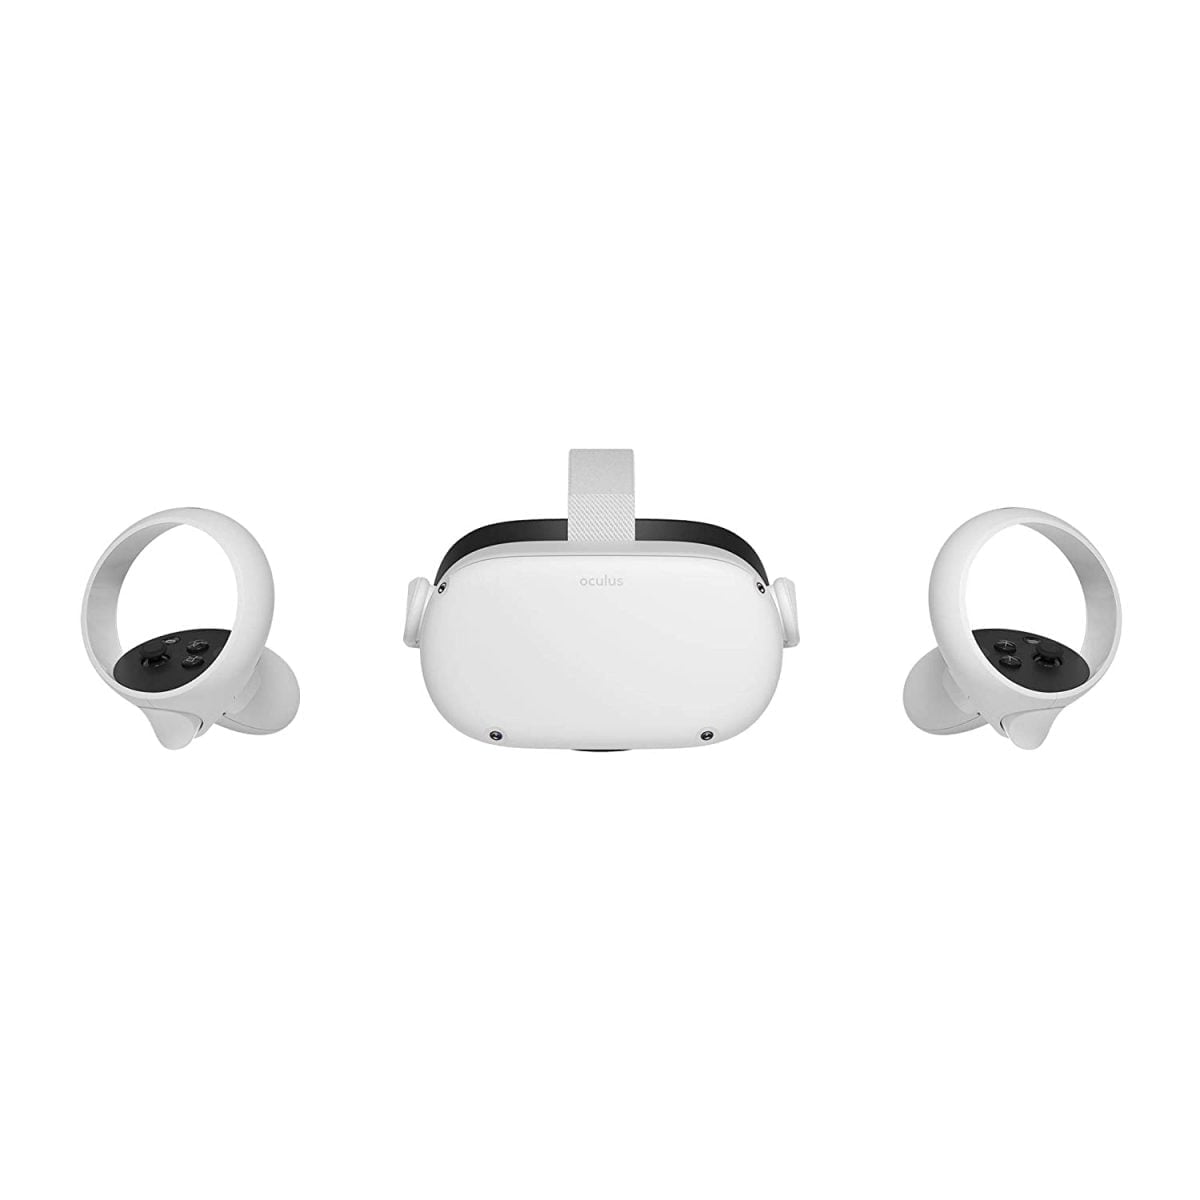 61Nrs7Qqzel. Sl1500 Oculus Https://Youtu.be/Atvgl9Wojsm Oculus Quest 2 Oculus Quest 2 256 Gb With Oculus Link Cable 5M Plus Advanced All-In-One Virtual Reality Headset (Combo Offer)